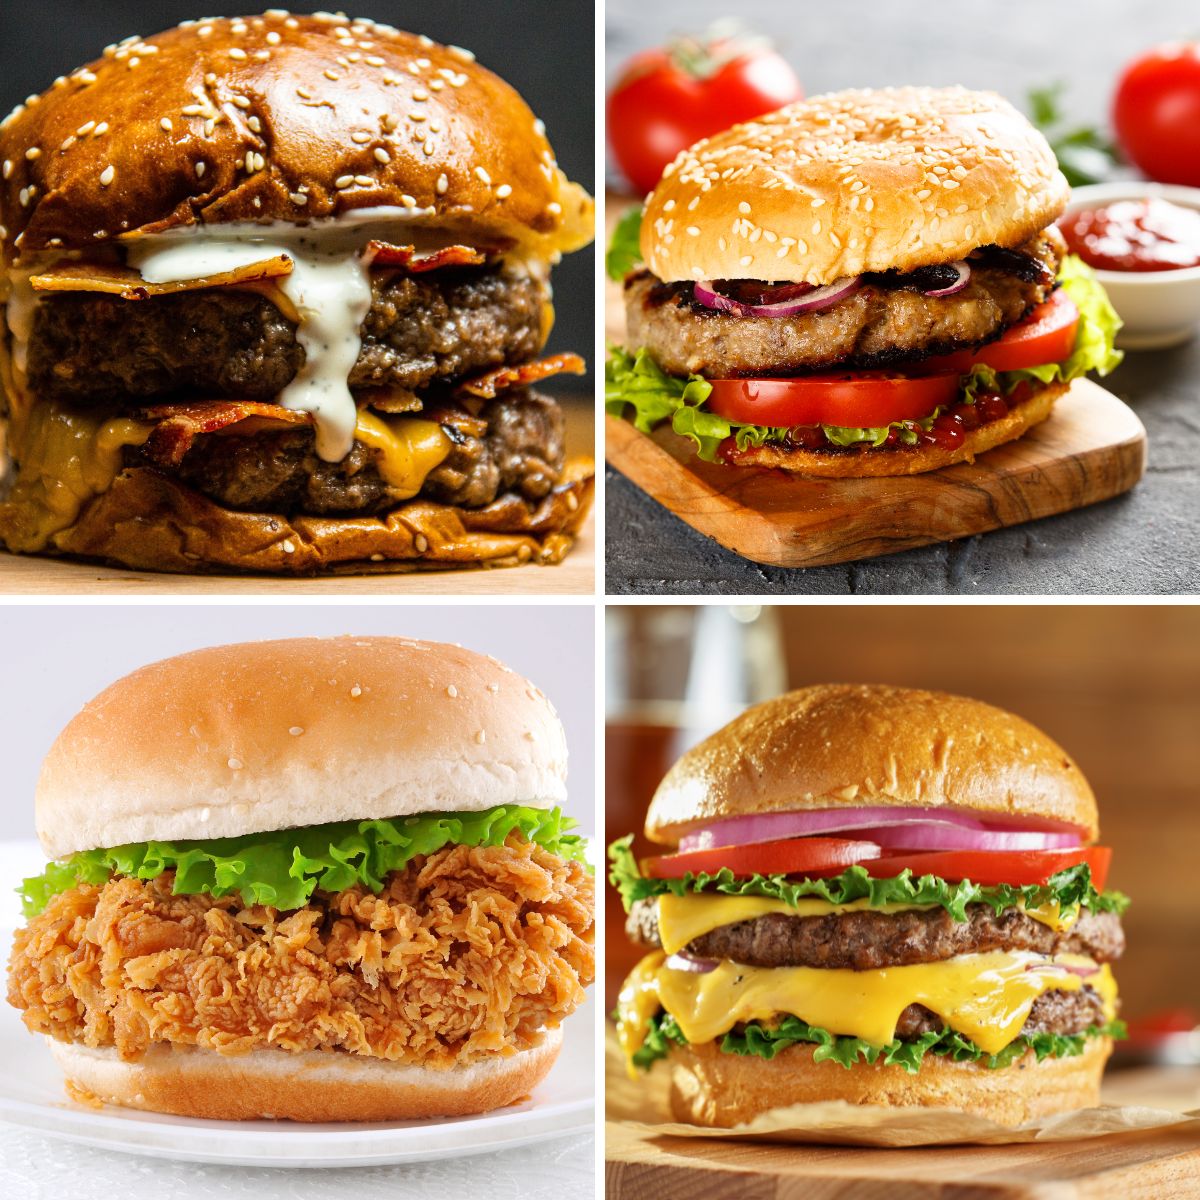 A recipe index of four different burgers, including a cheesy double burger, a classic burger with tomatoes and lettuce, a crispy chicken burger, and a burger with melting cheese and fresh vegetables.